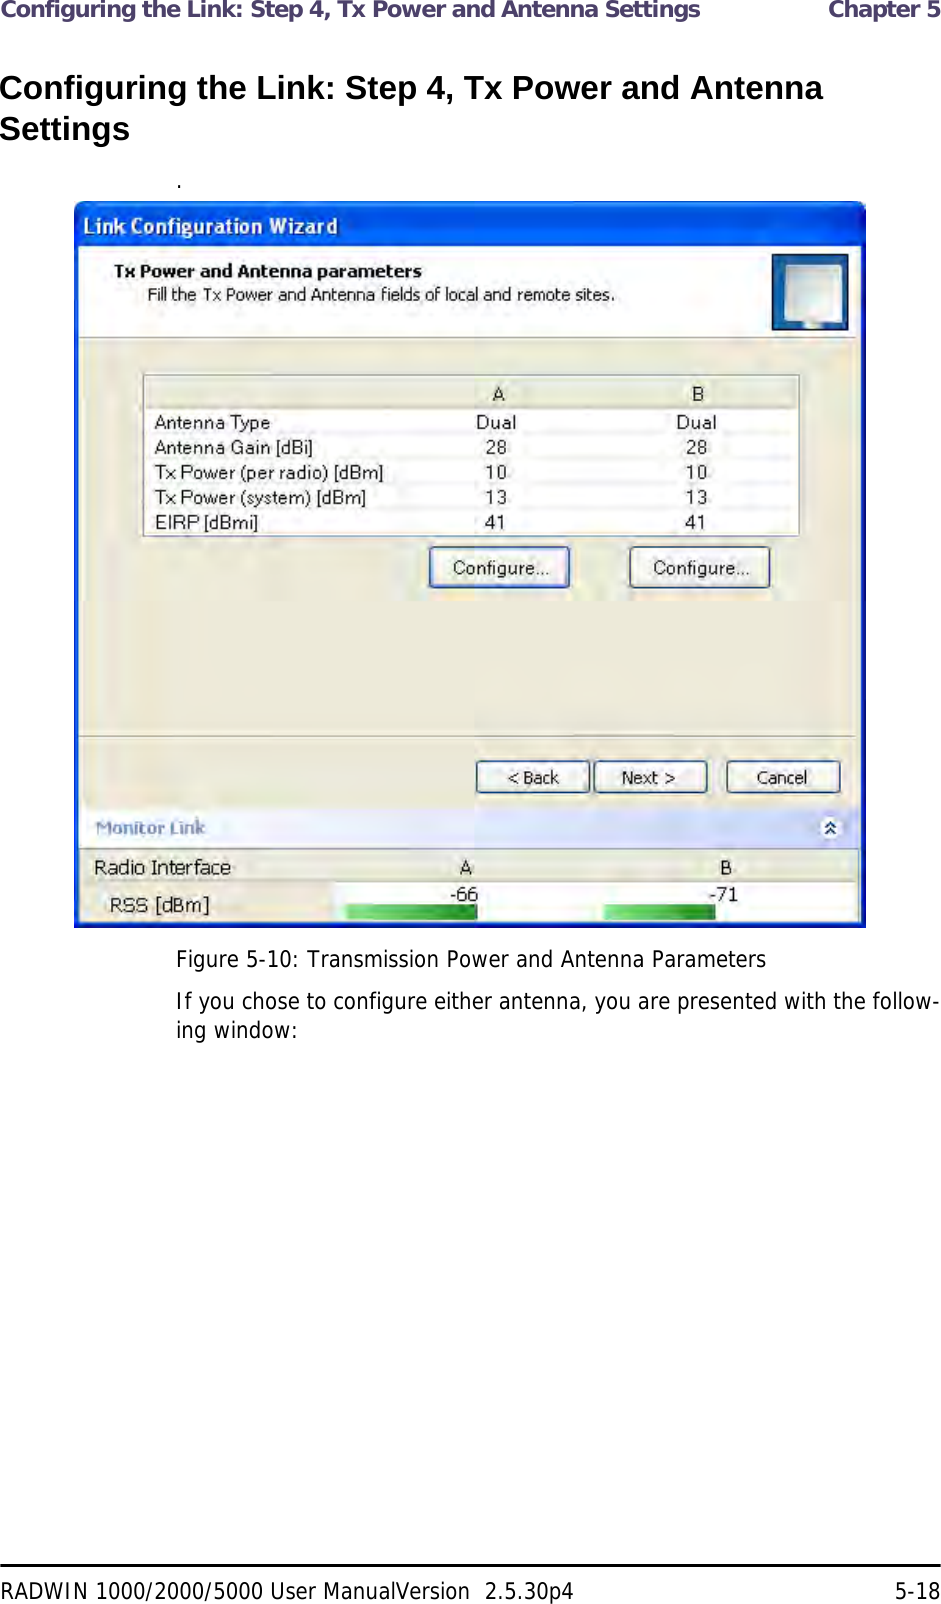 Configuring the Link: Step 4, Tx Power and Antenna Settings  Chapter 5RADWIN 1000/2000/5000 User ManualVersion  2.5.30p4 5-18Configuring the Link: Step 4, Tx Power and Antenna Settings.Figure 5-10: Transmission Power and Antenna ParametersIf you chose to configure either antenna, you are presented with the follow-ing window: